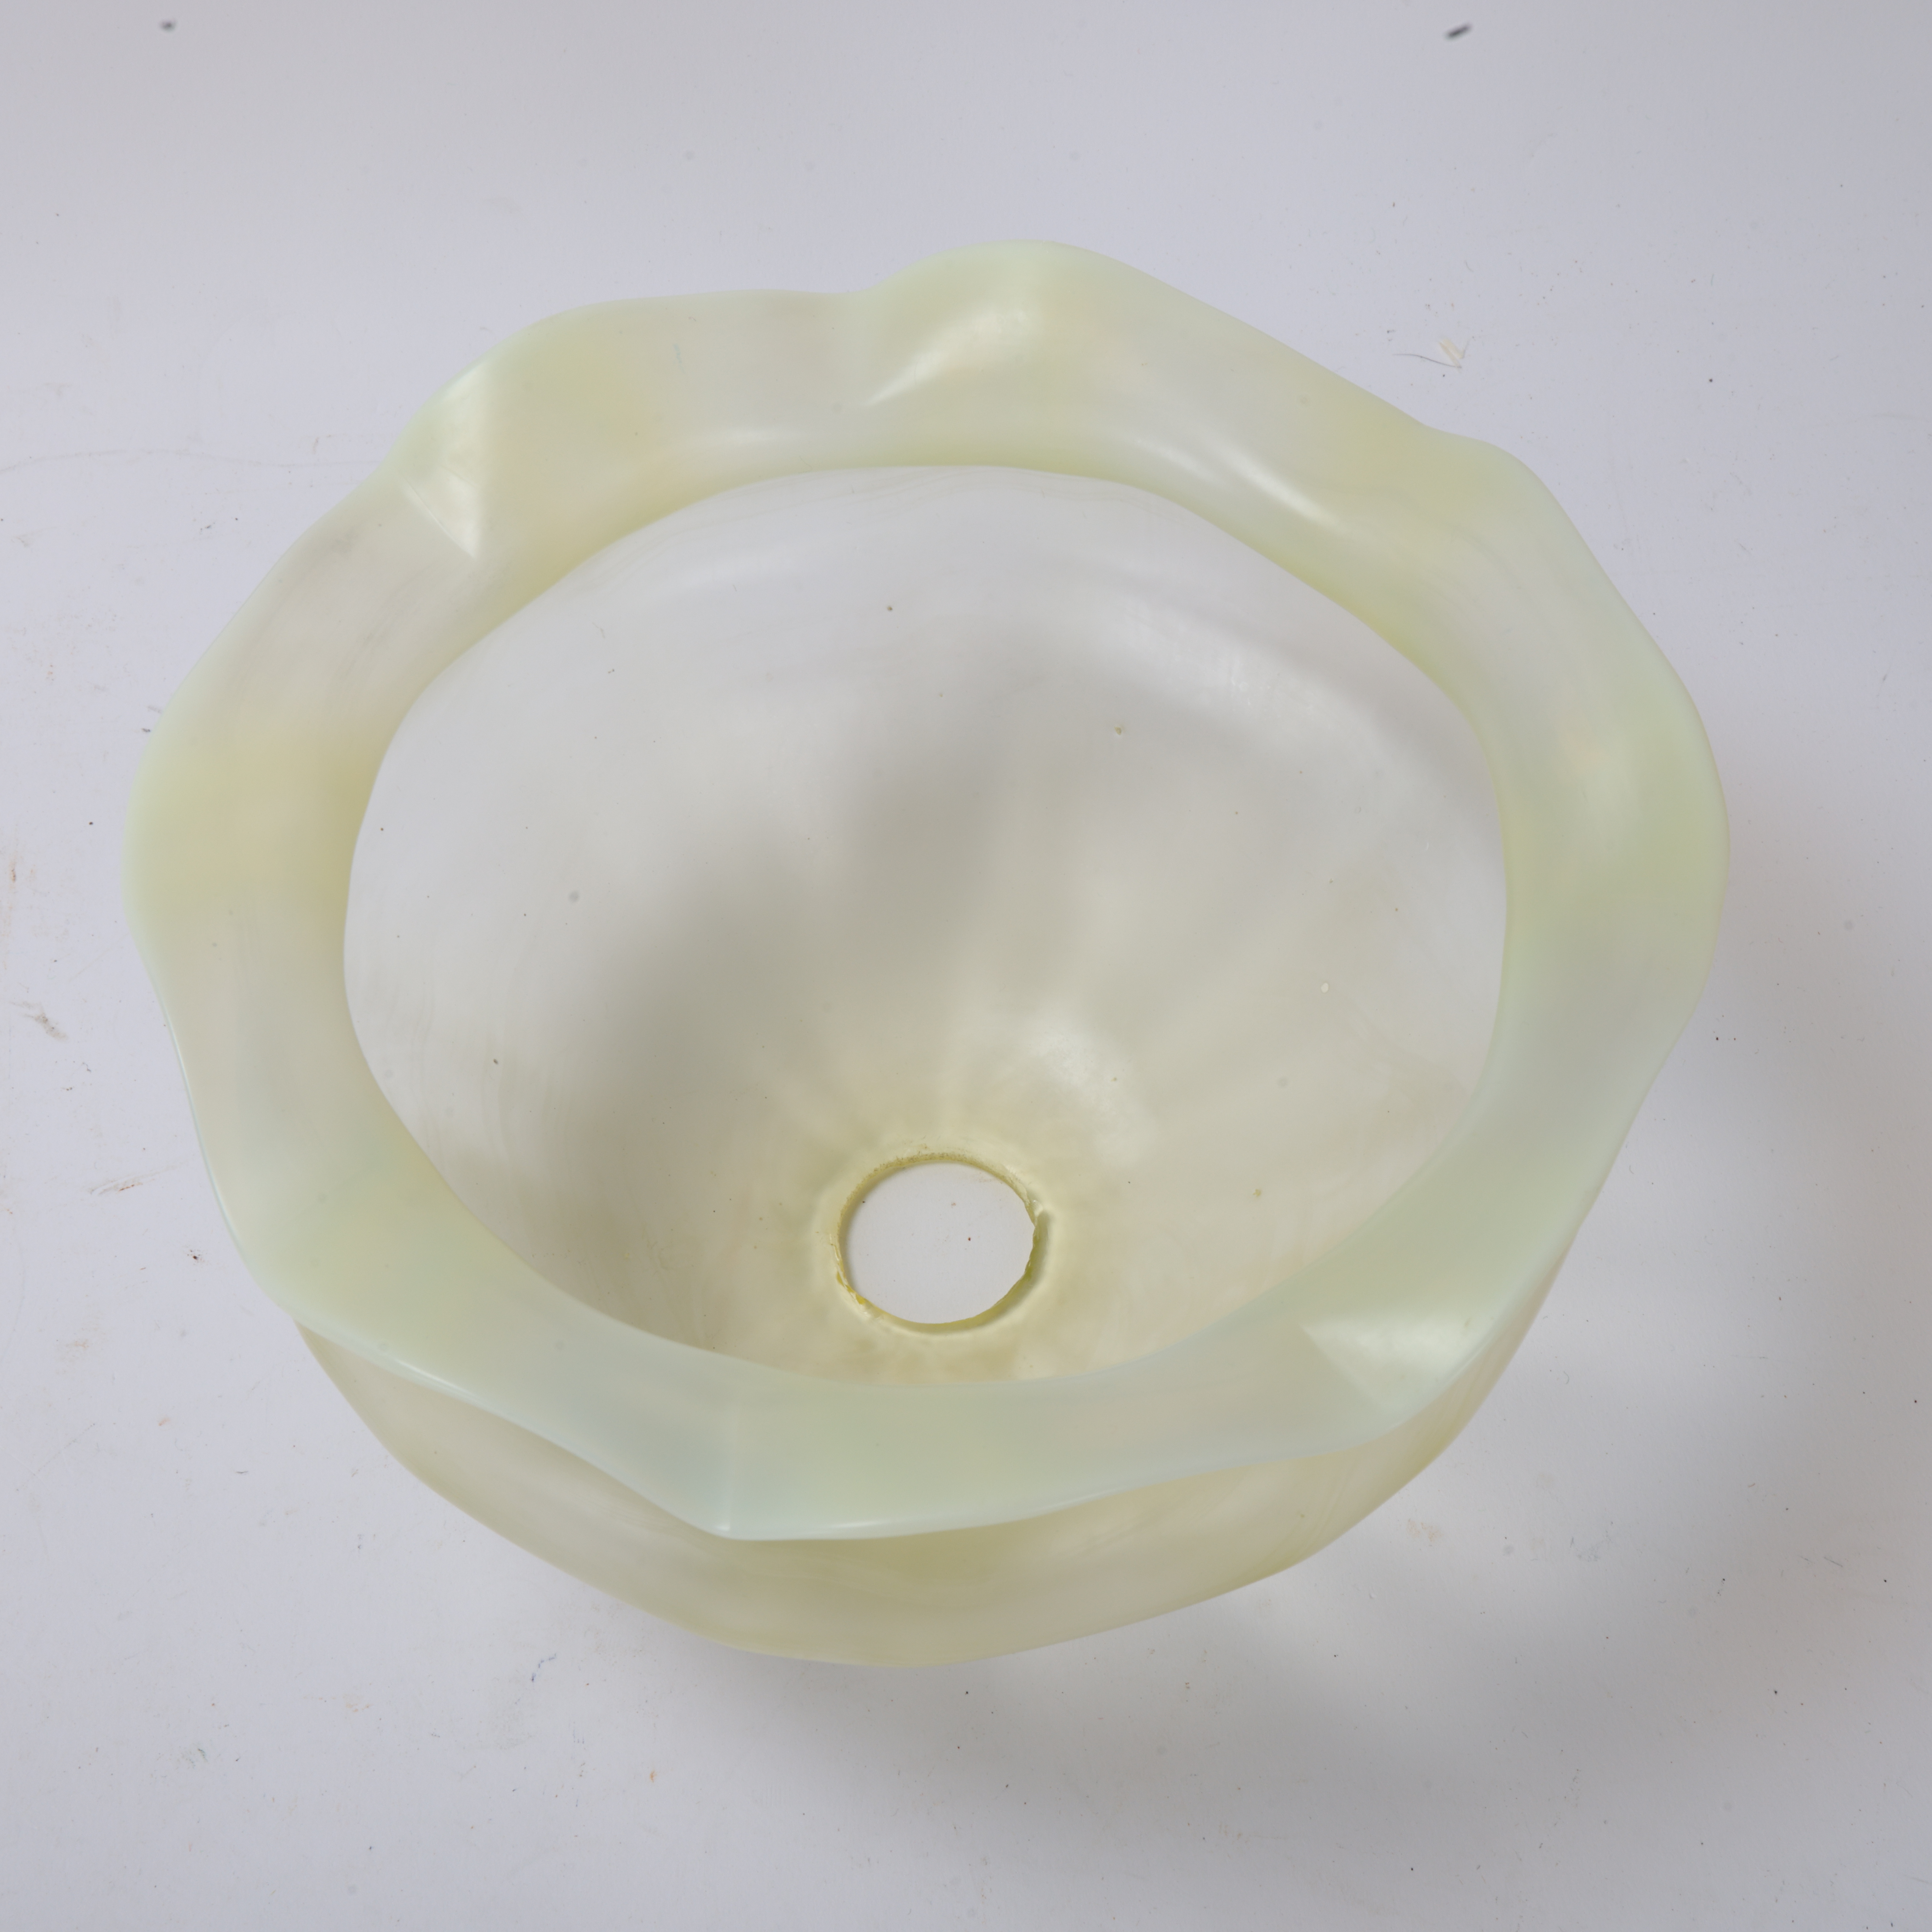 Art Nouveau vaseline glass shade with frilled edge, diameter 19.5cm Good condition, no chips - Image 2 of 3